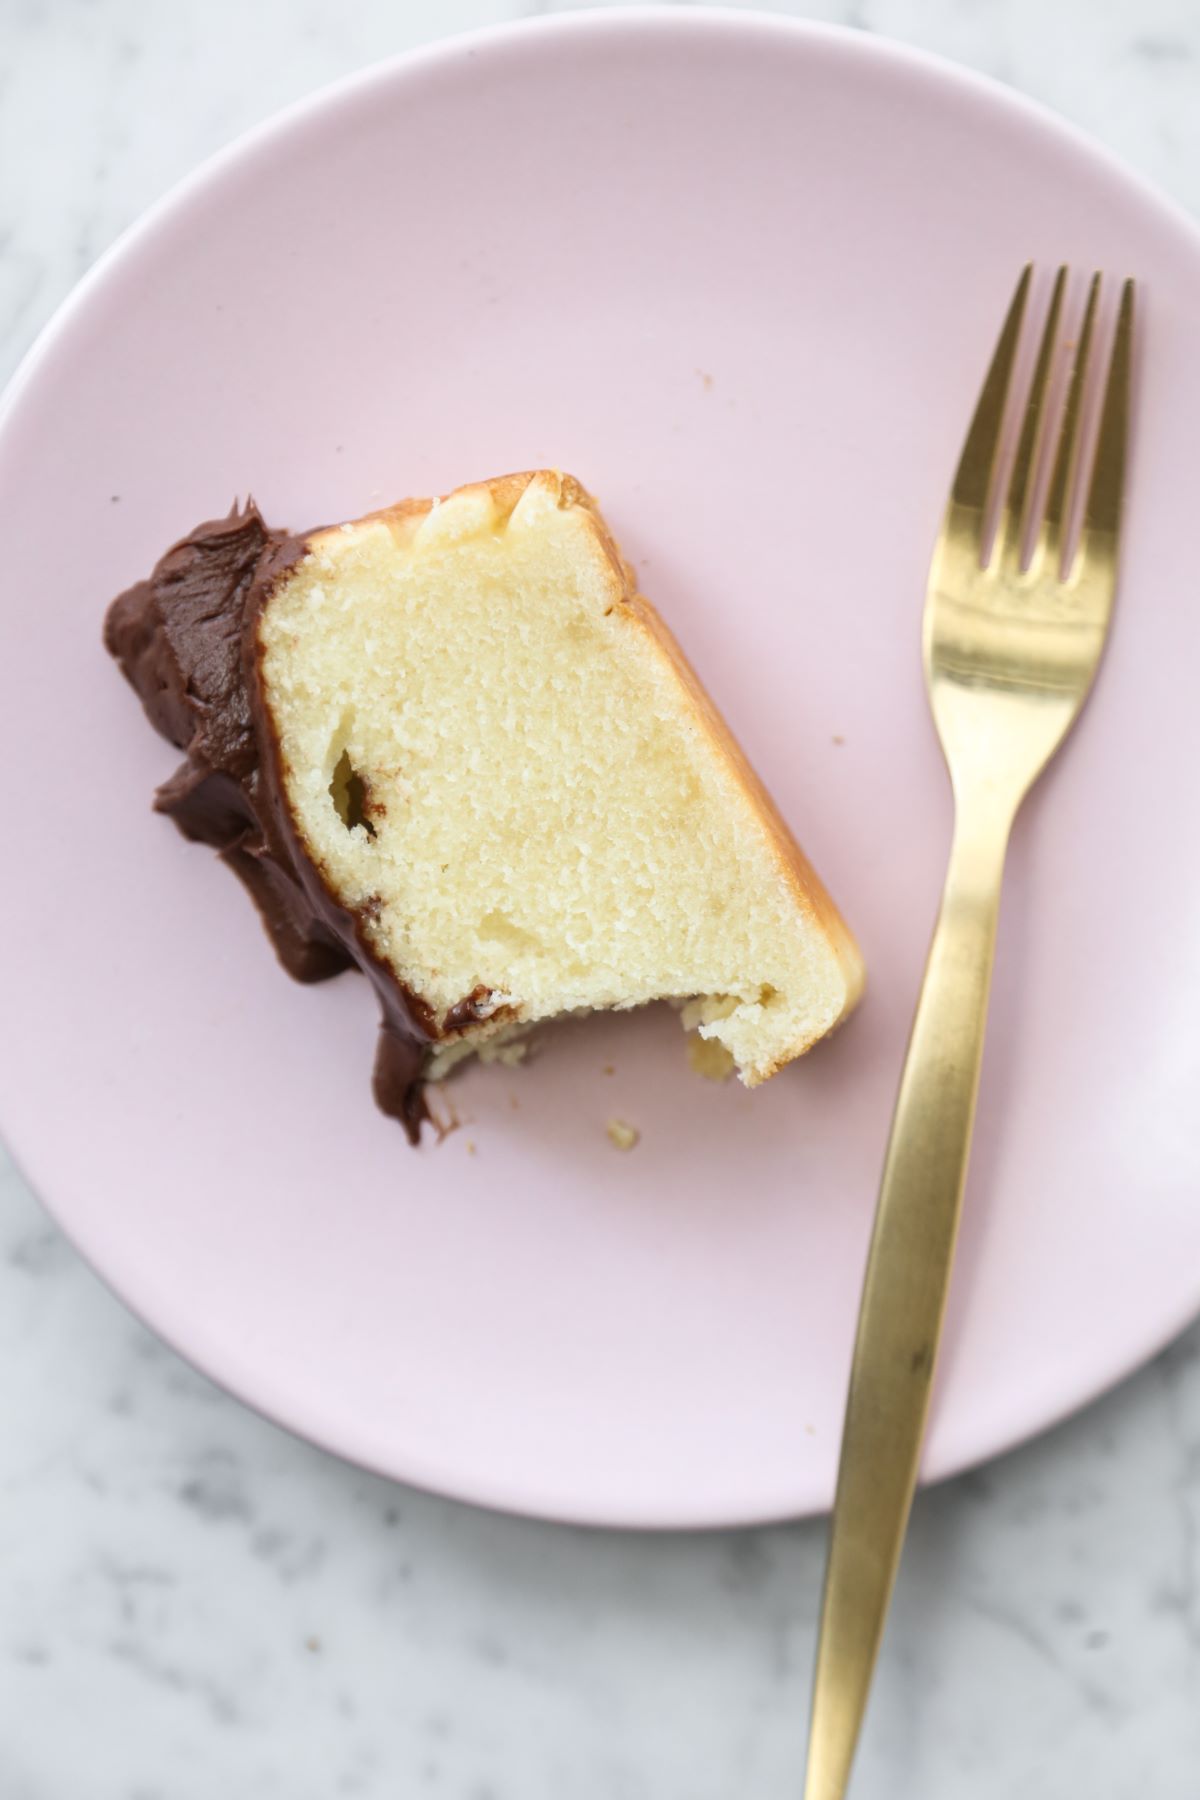 Slice of vanilla loaf cake with chocolate ganache on a pink plate and a gold fork.